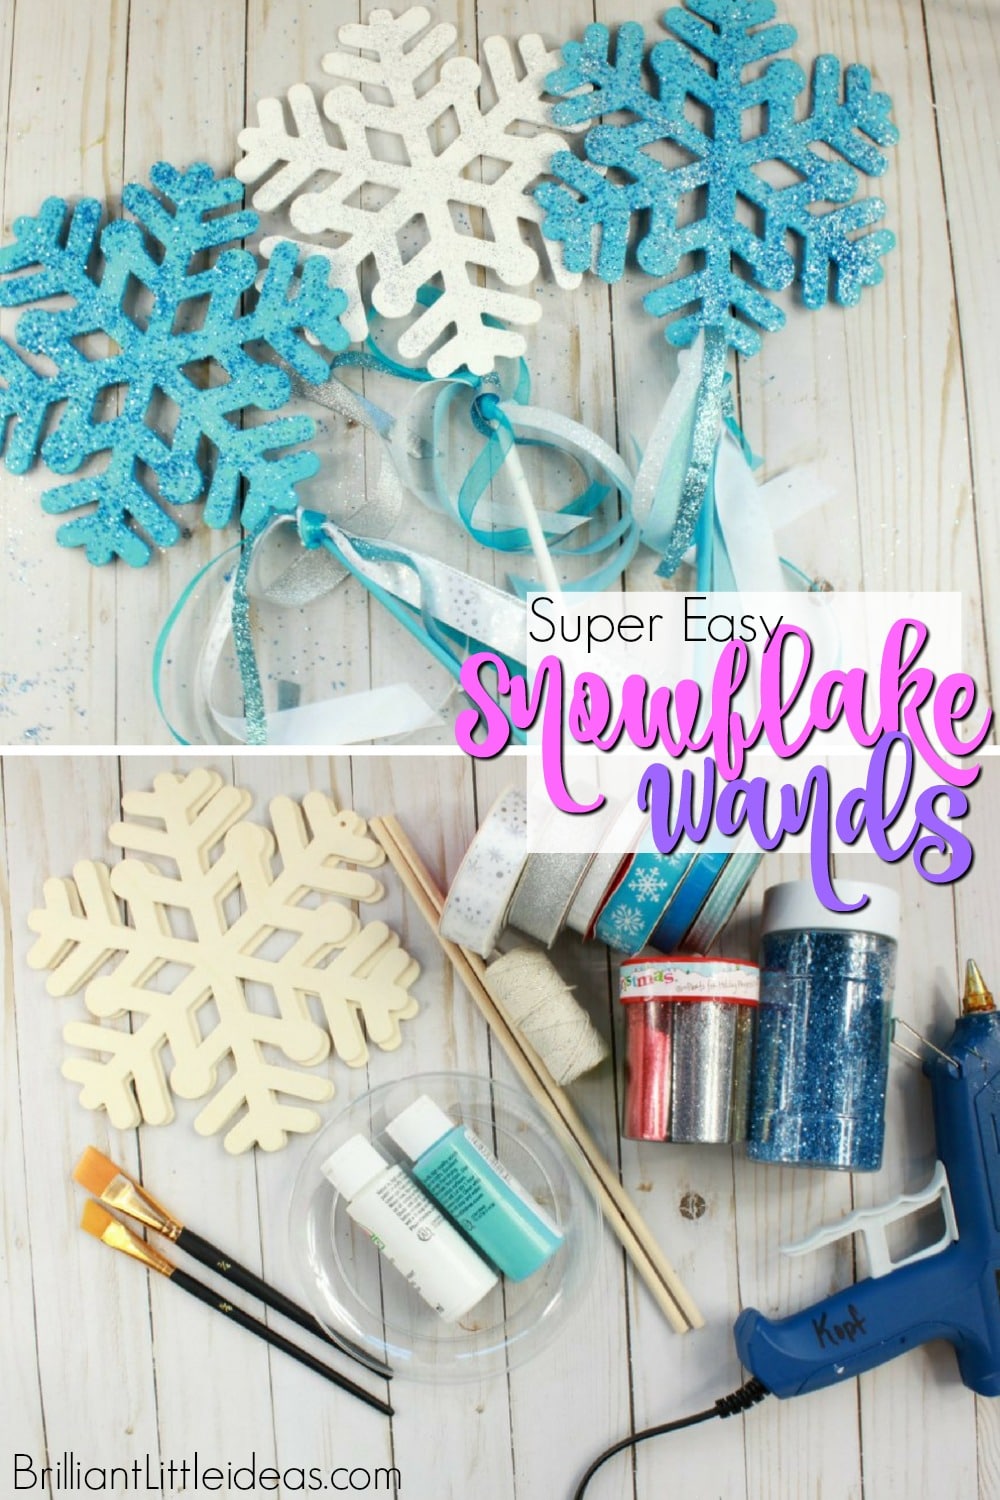 Your kids are going to love this DIY Snowflake Wand party favor. It goes  great with a Frozen Elsa Costume. We used ours for pretend play being Snow  Queens in a winter